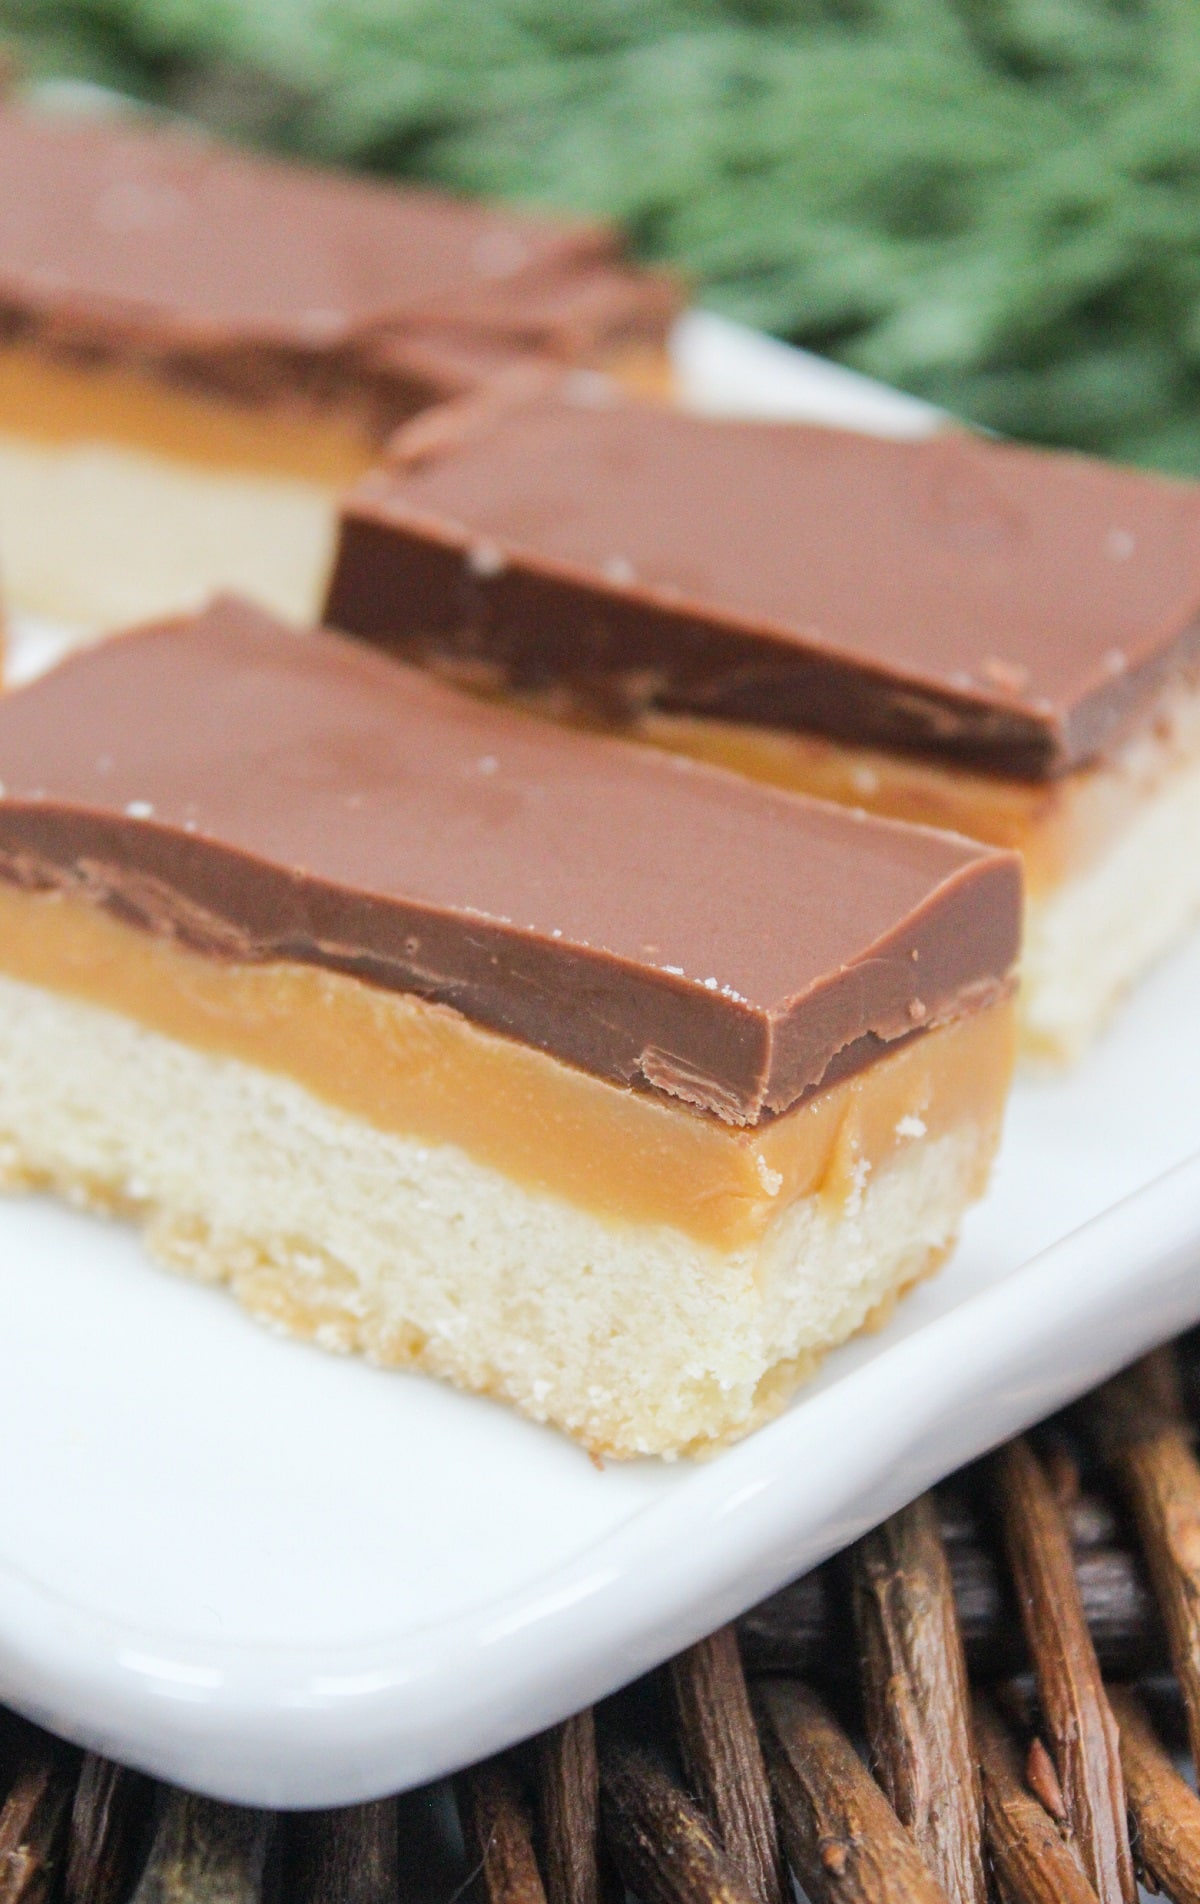 Cookie style bars cut into rectangles. The bars are layers wit h shortbread on the bottom, then caramel, and chocolate on top.